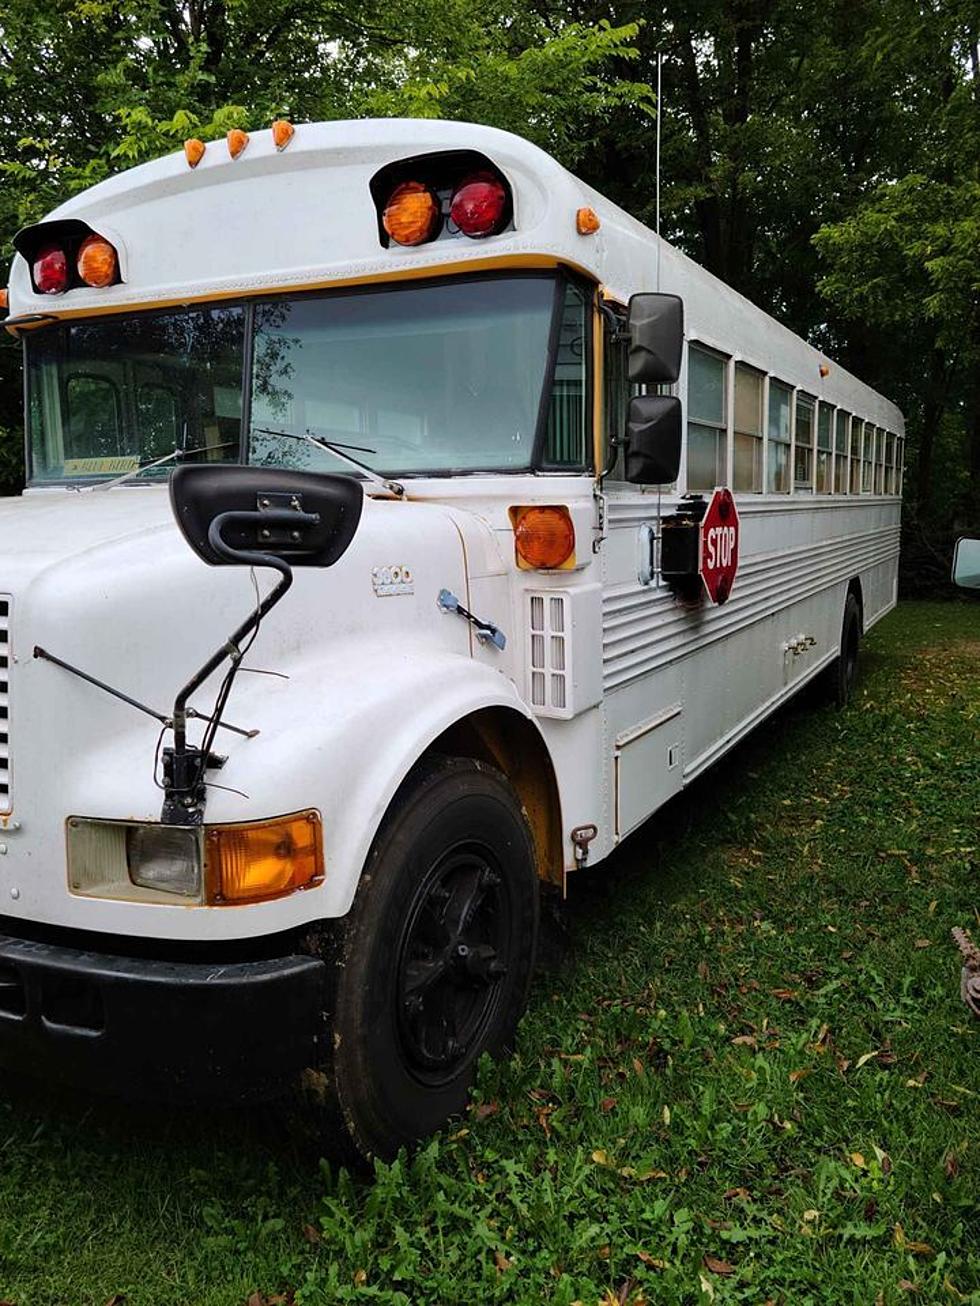 How Kentucky Best Friends Transformed An Old Bus Into Tiny Home & It’s For Sale